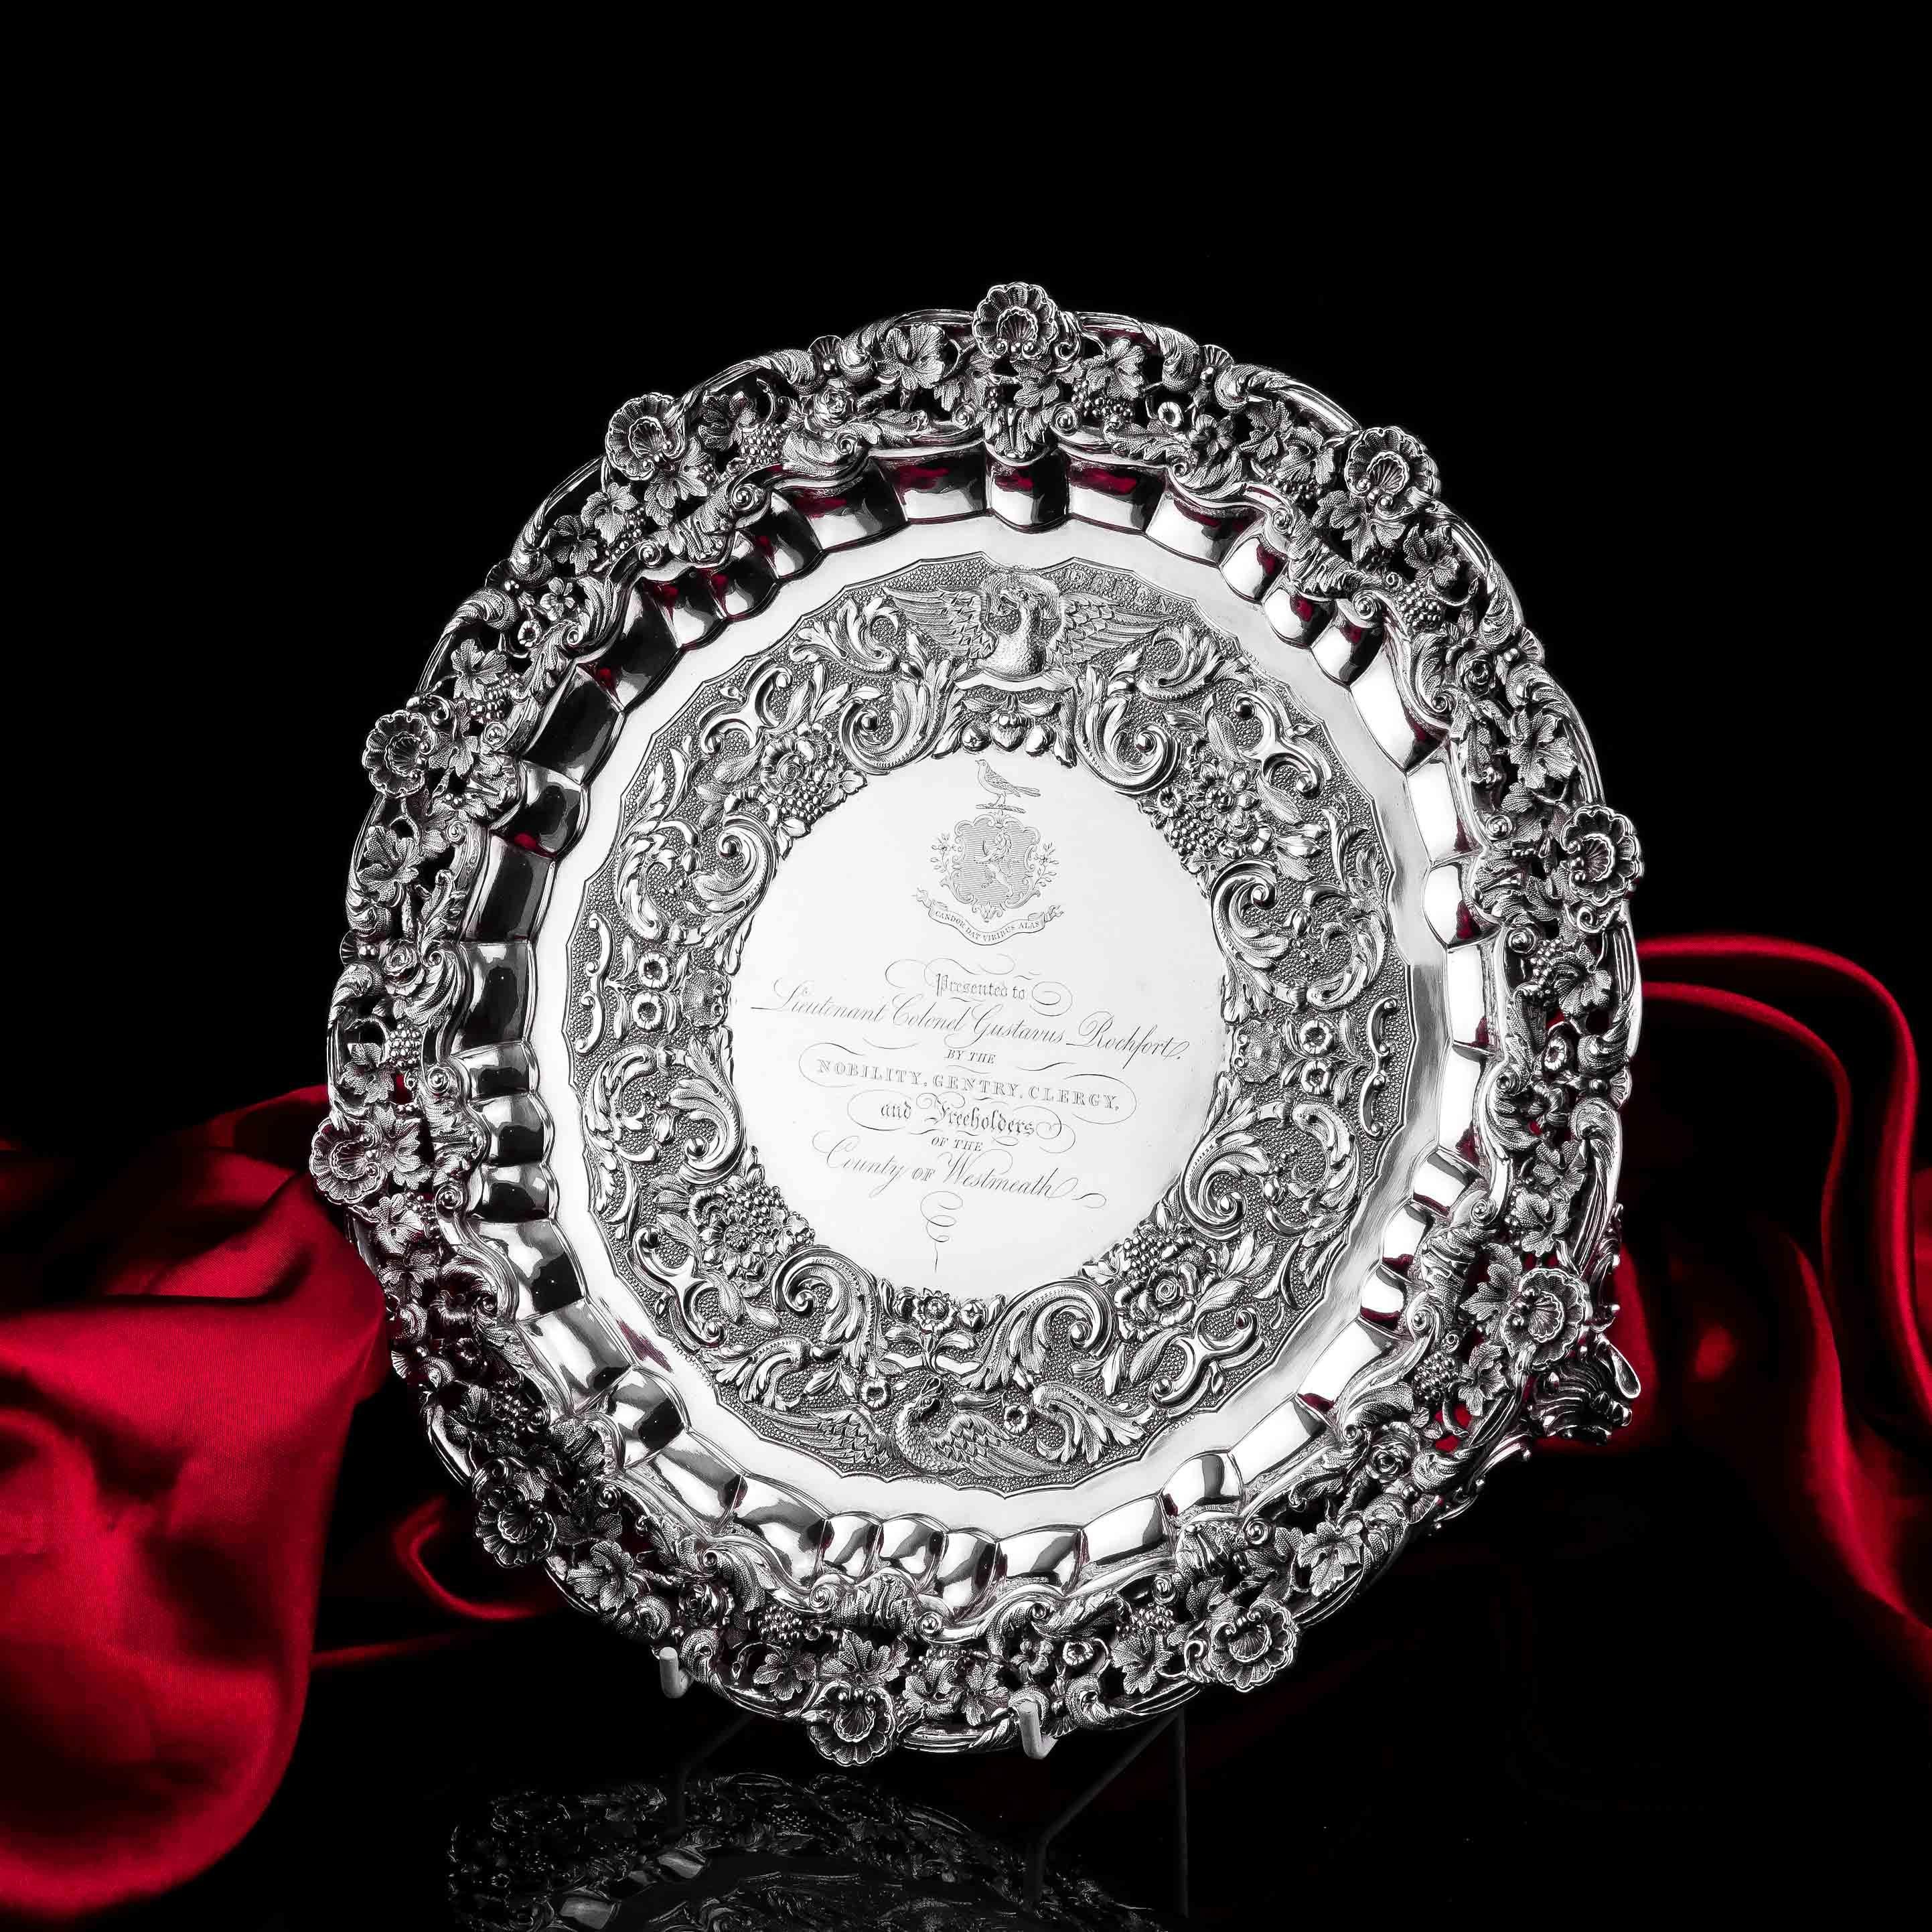 We are delighted to offer this Magnificent solid silver Georgian tray/salver made in Dublin 1833 by James Fray.
 
The salver presents an array of remarkable and striking features such as the applied cast-silver border, an intricately chased inner